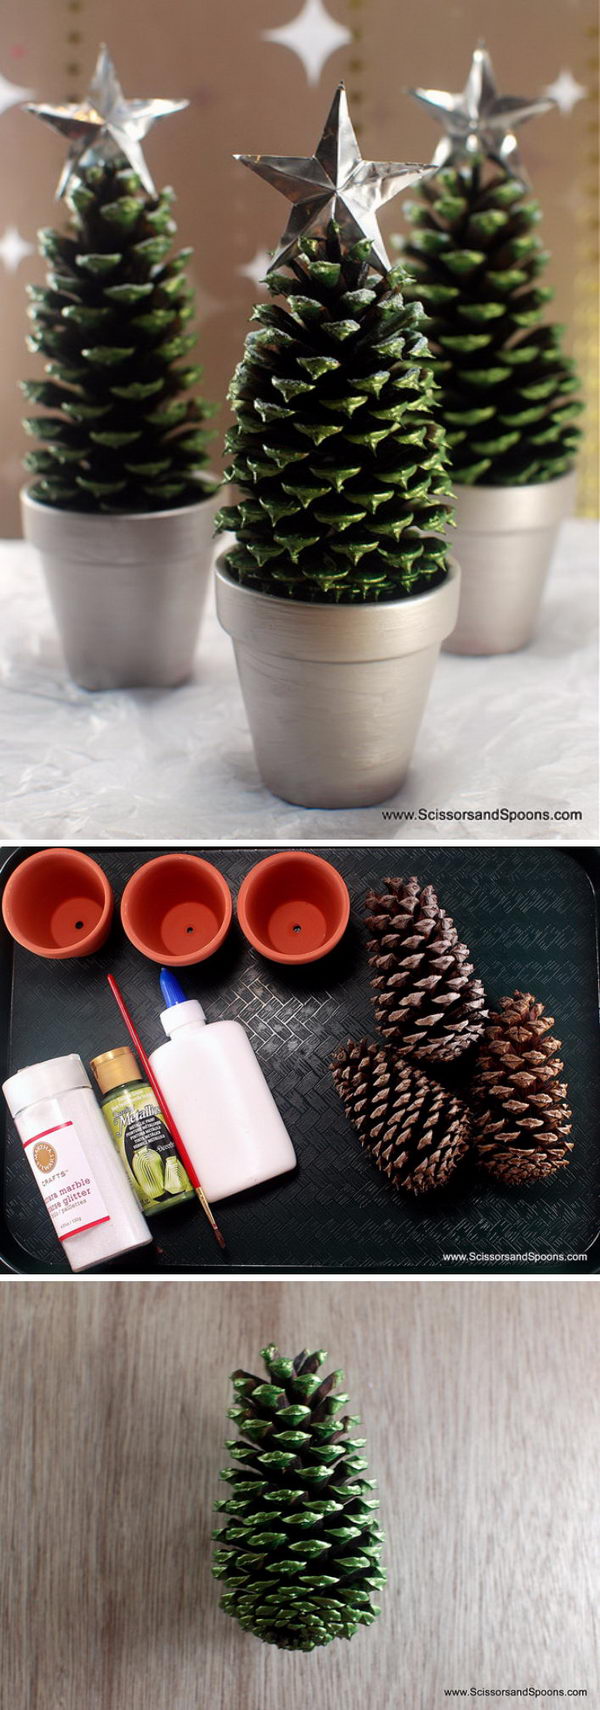 Easy and Cool Christmas Decorations That You Can Make